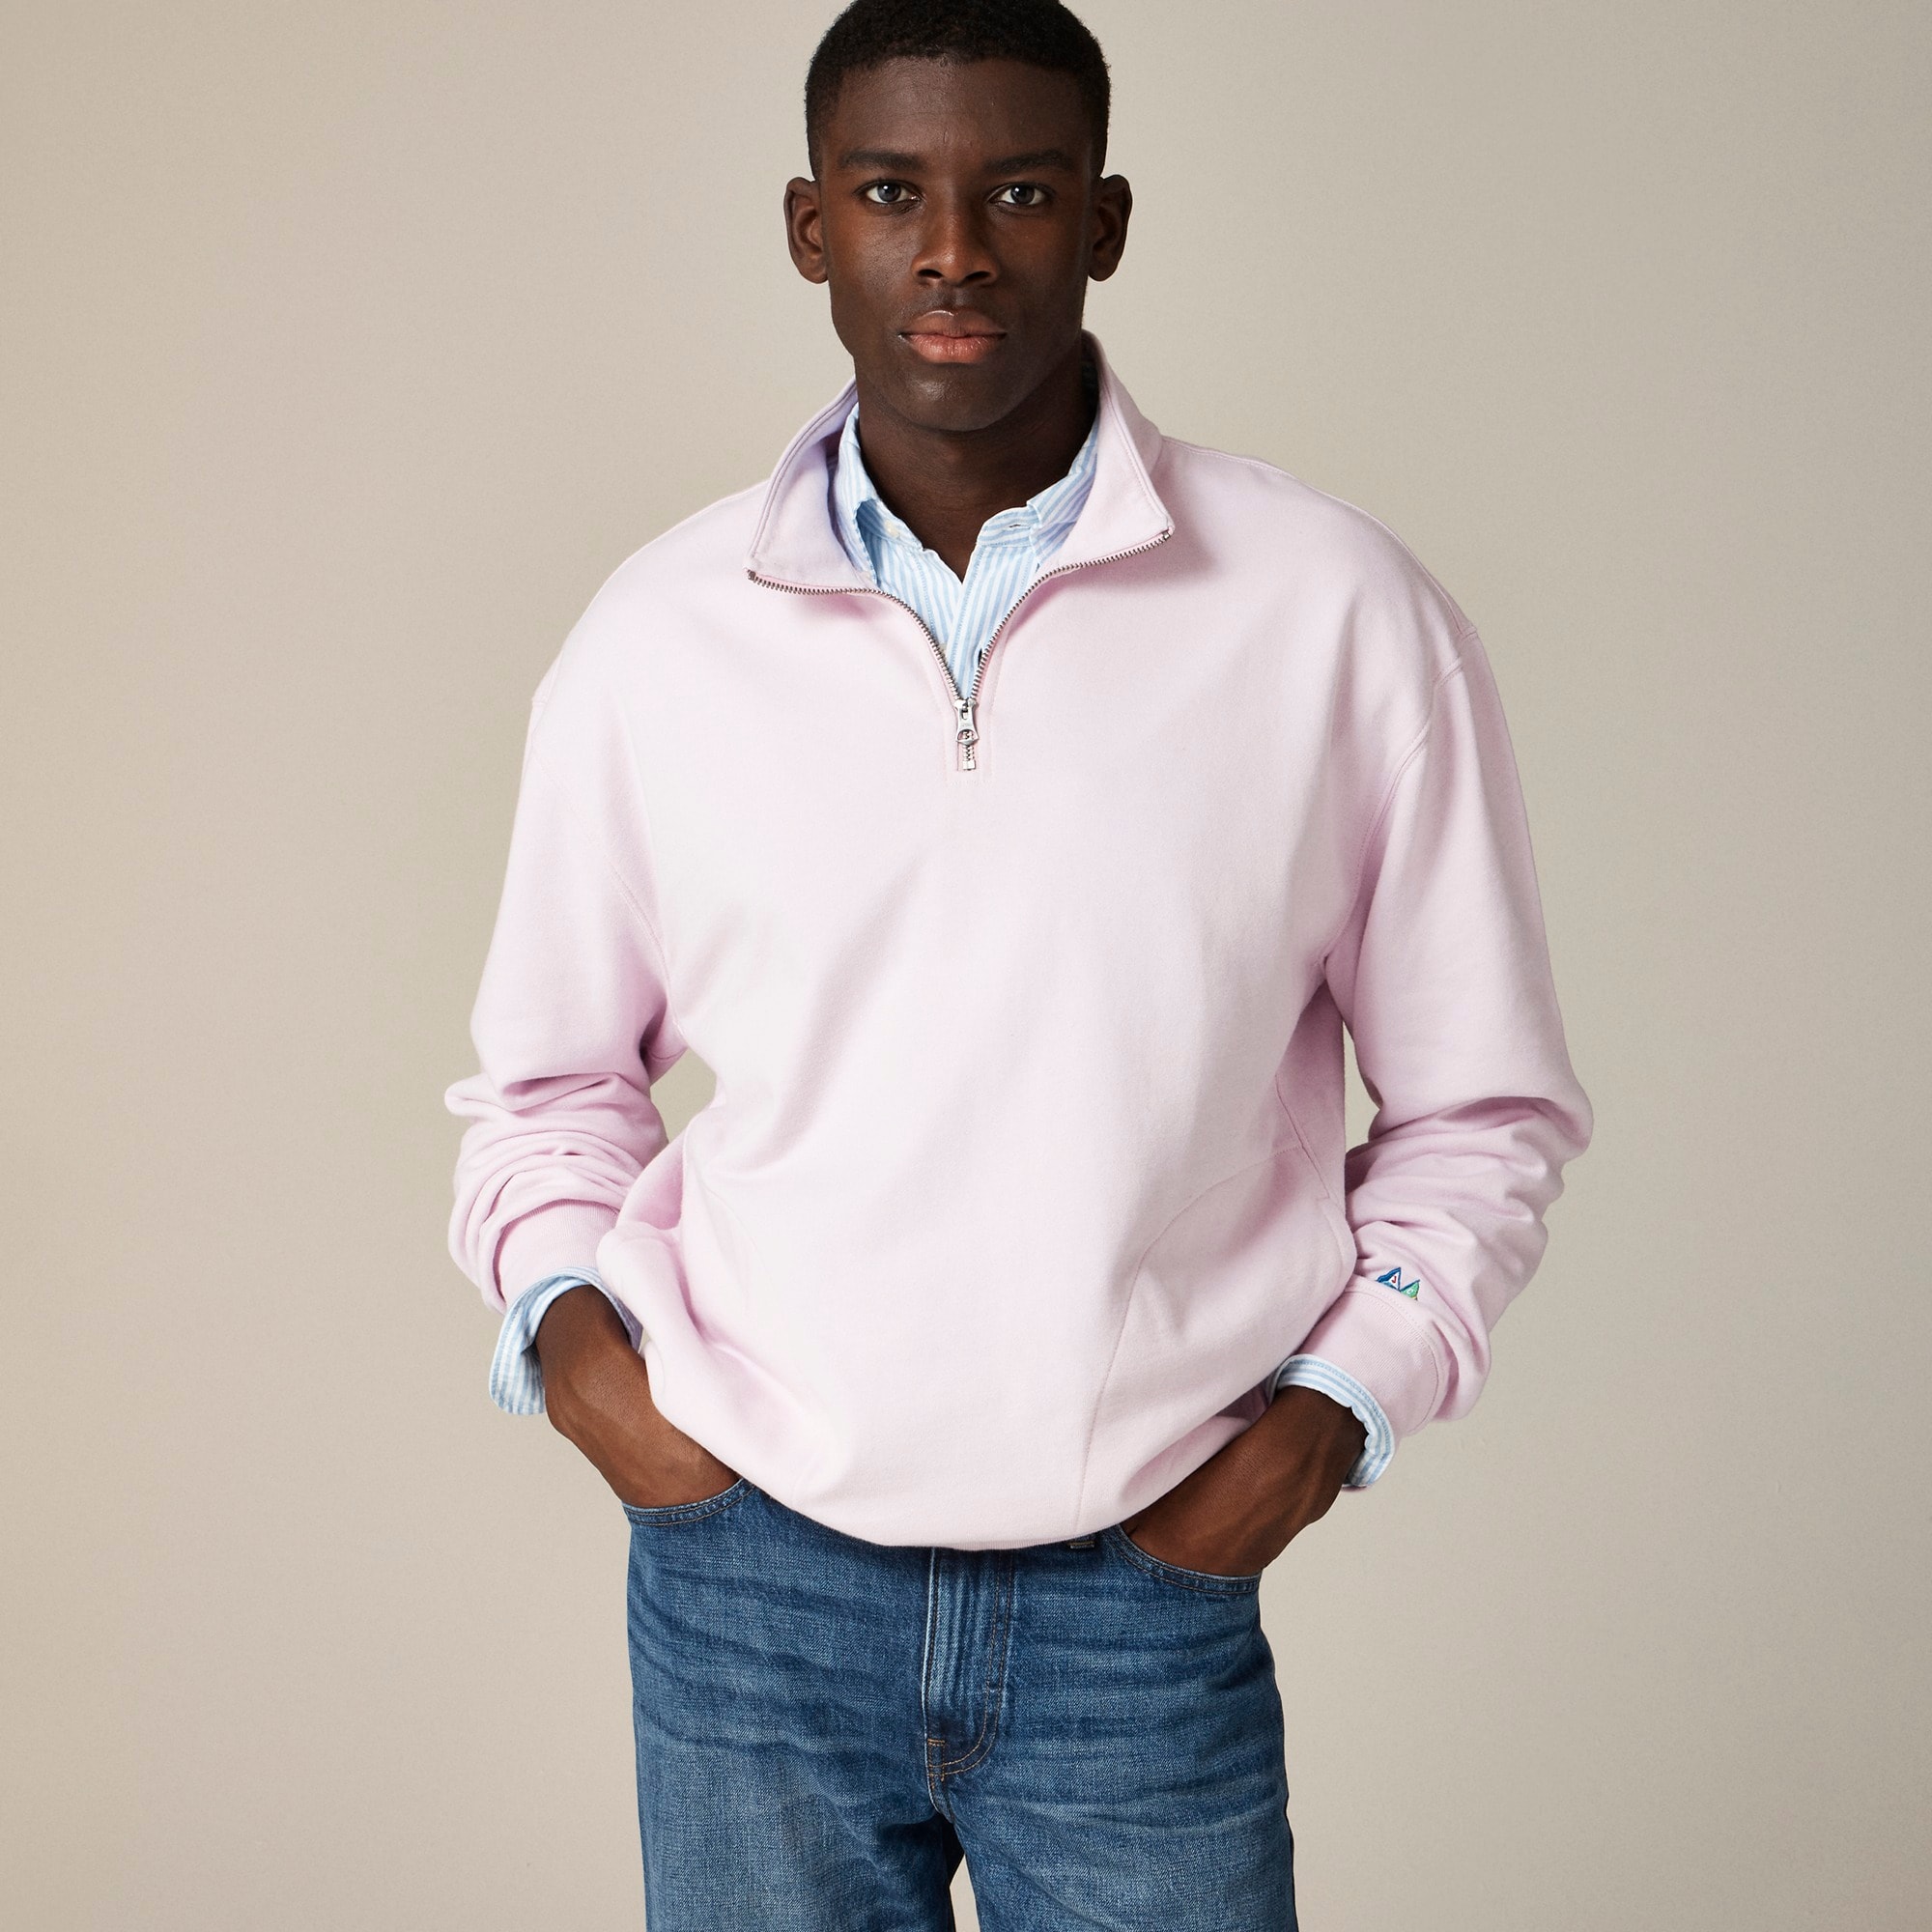  Relaxed-fit lightweight french terry quarter-zip sweatshirt